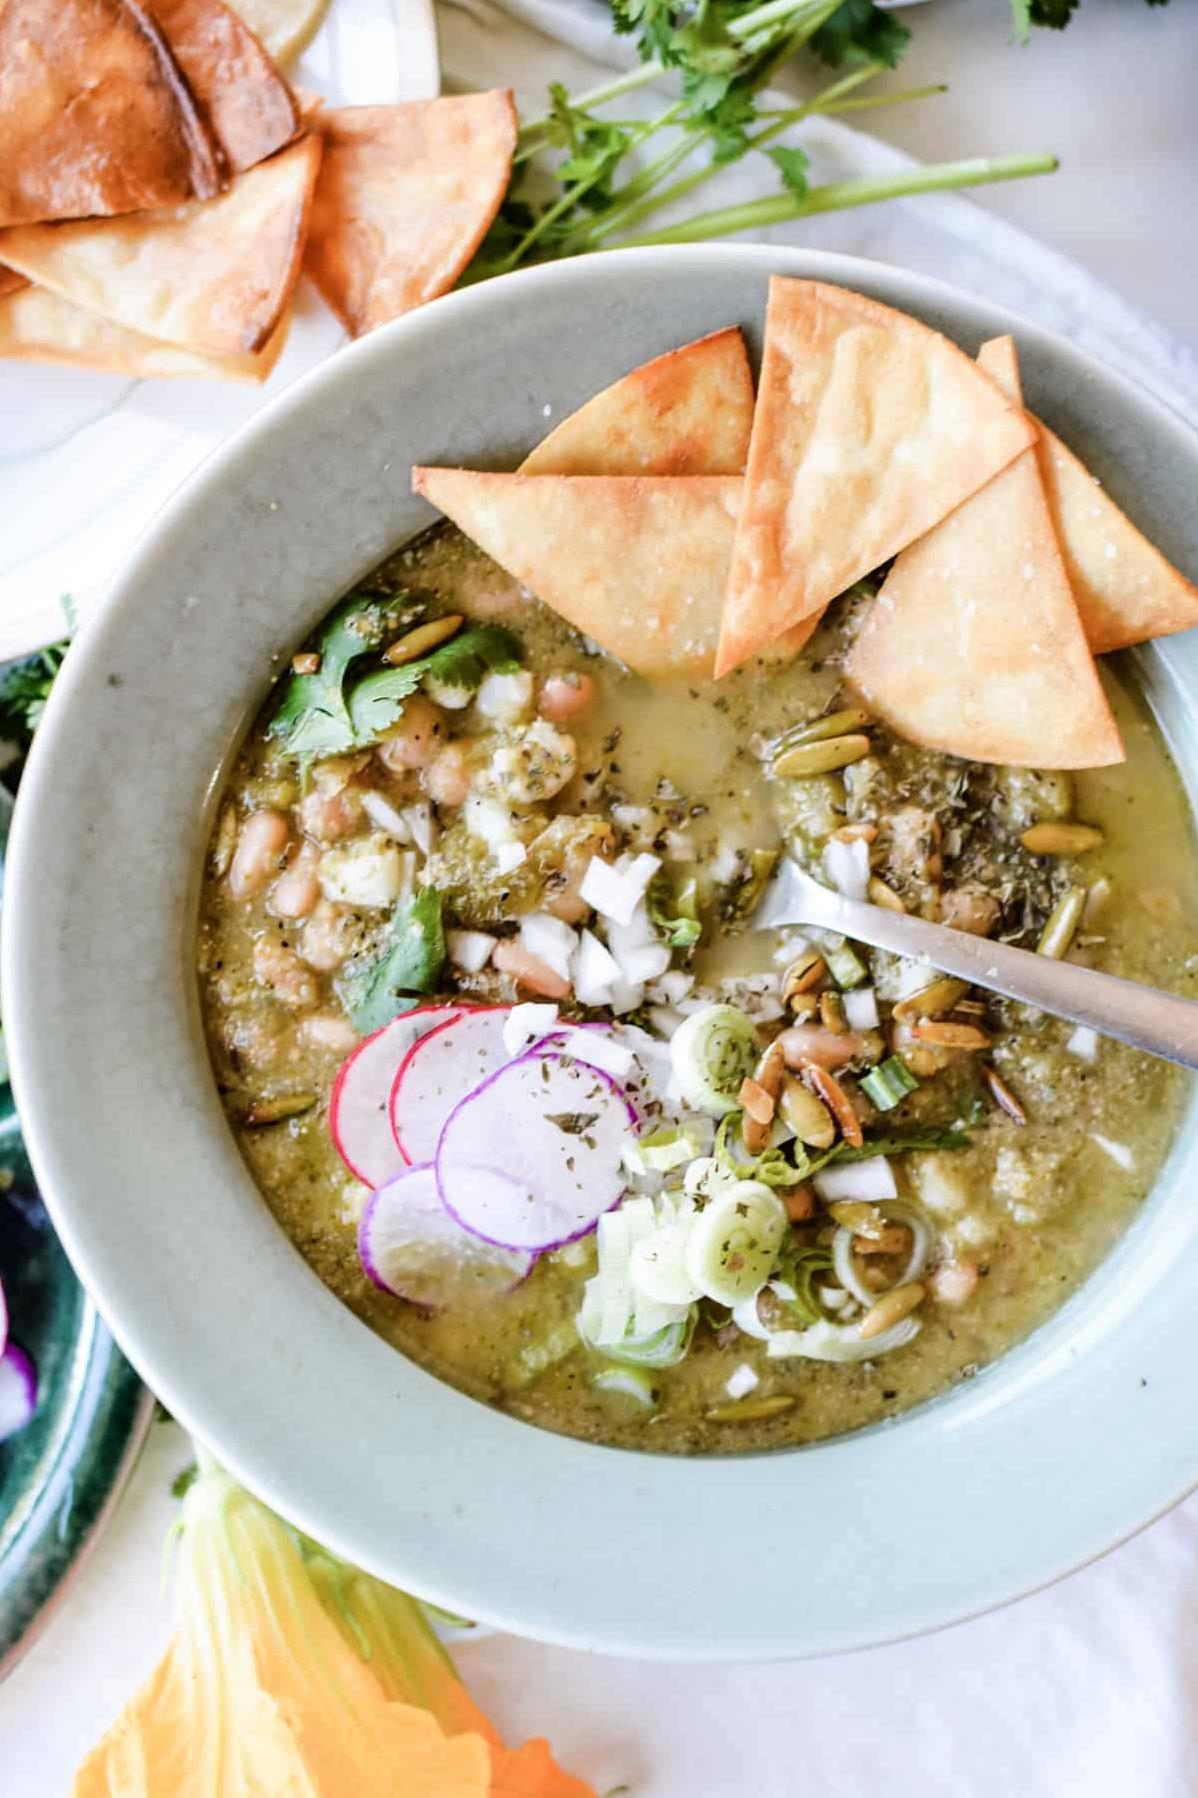  Satisfy your taste buds with vegetarian posole!